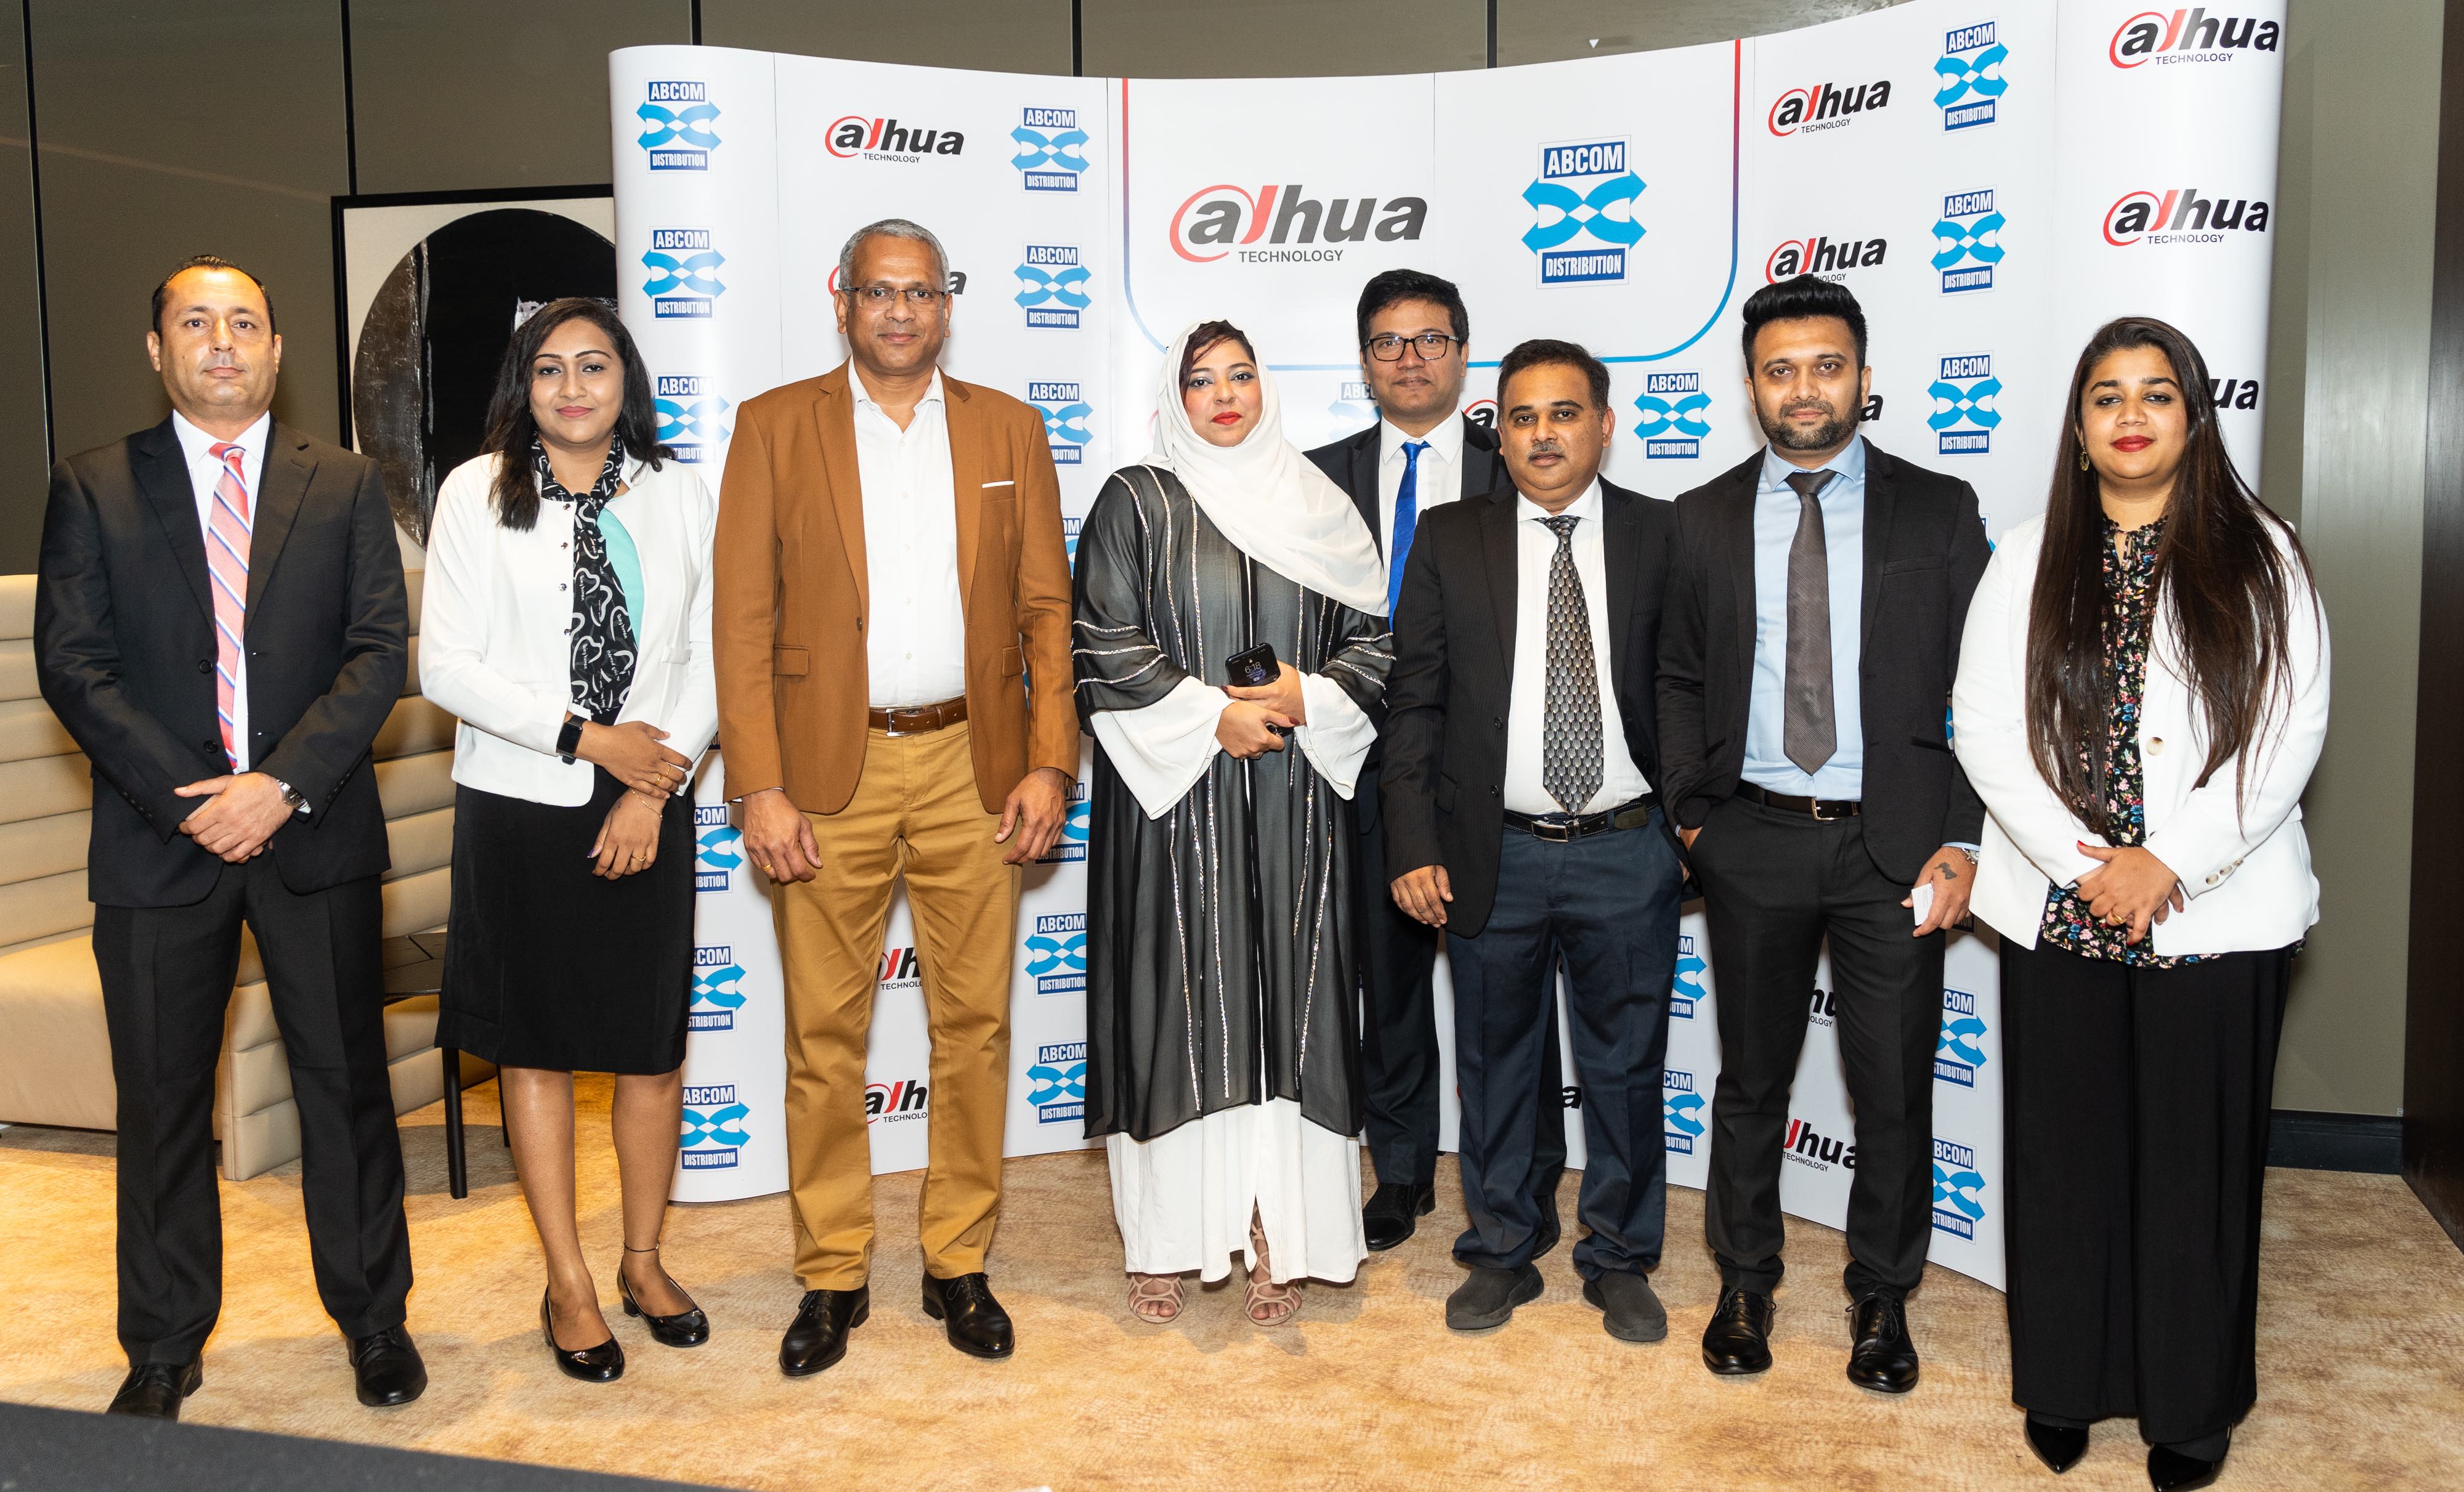 Dahua Technology strikes distribution partnership with ABCOM; brings state-of-the-art smart IoT and digital signage solutions to MENA market